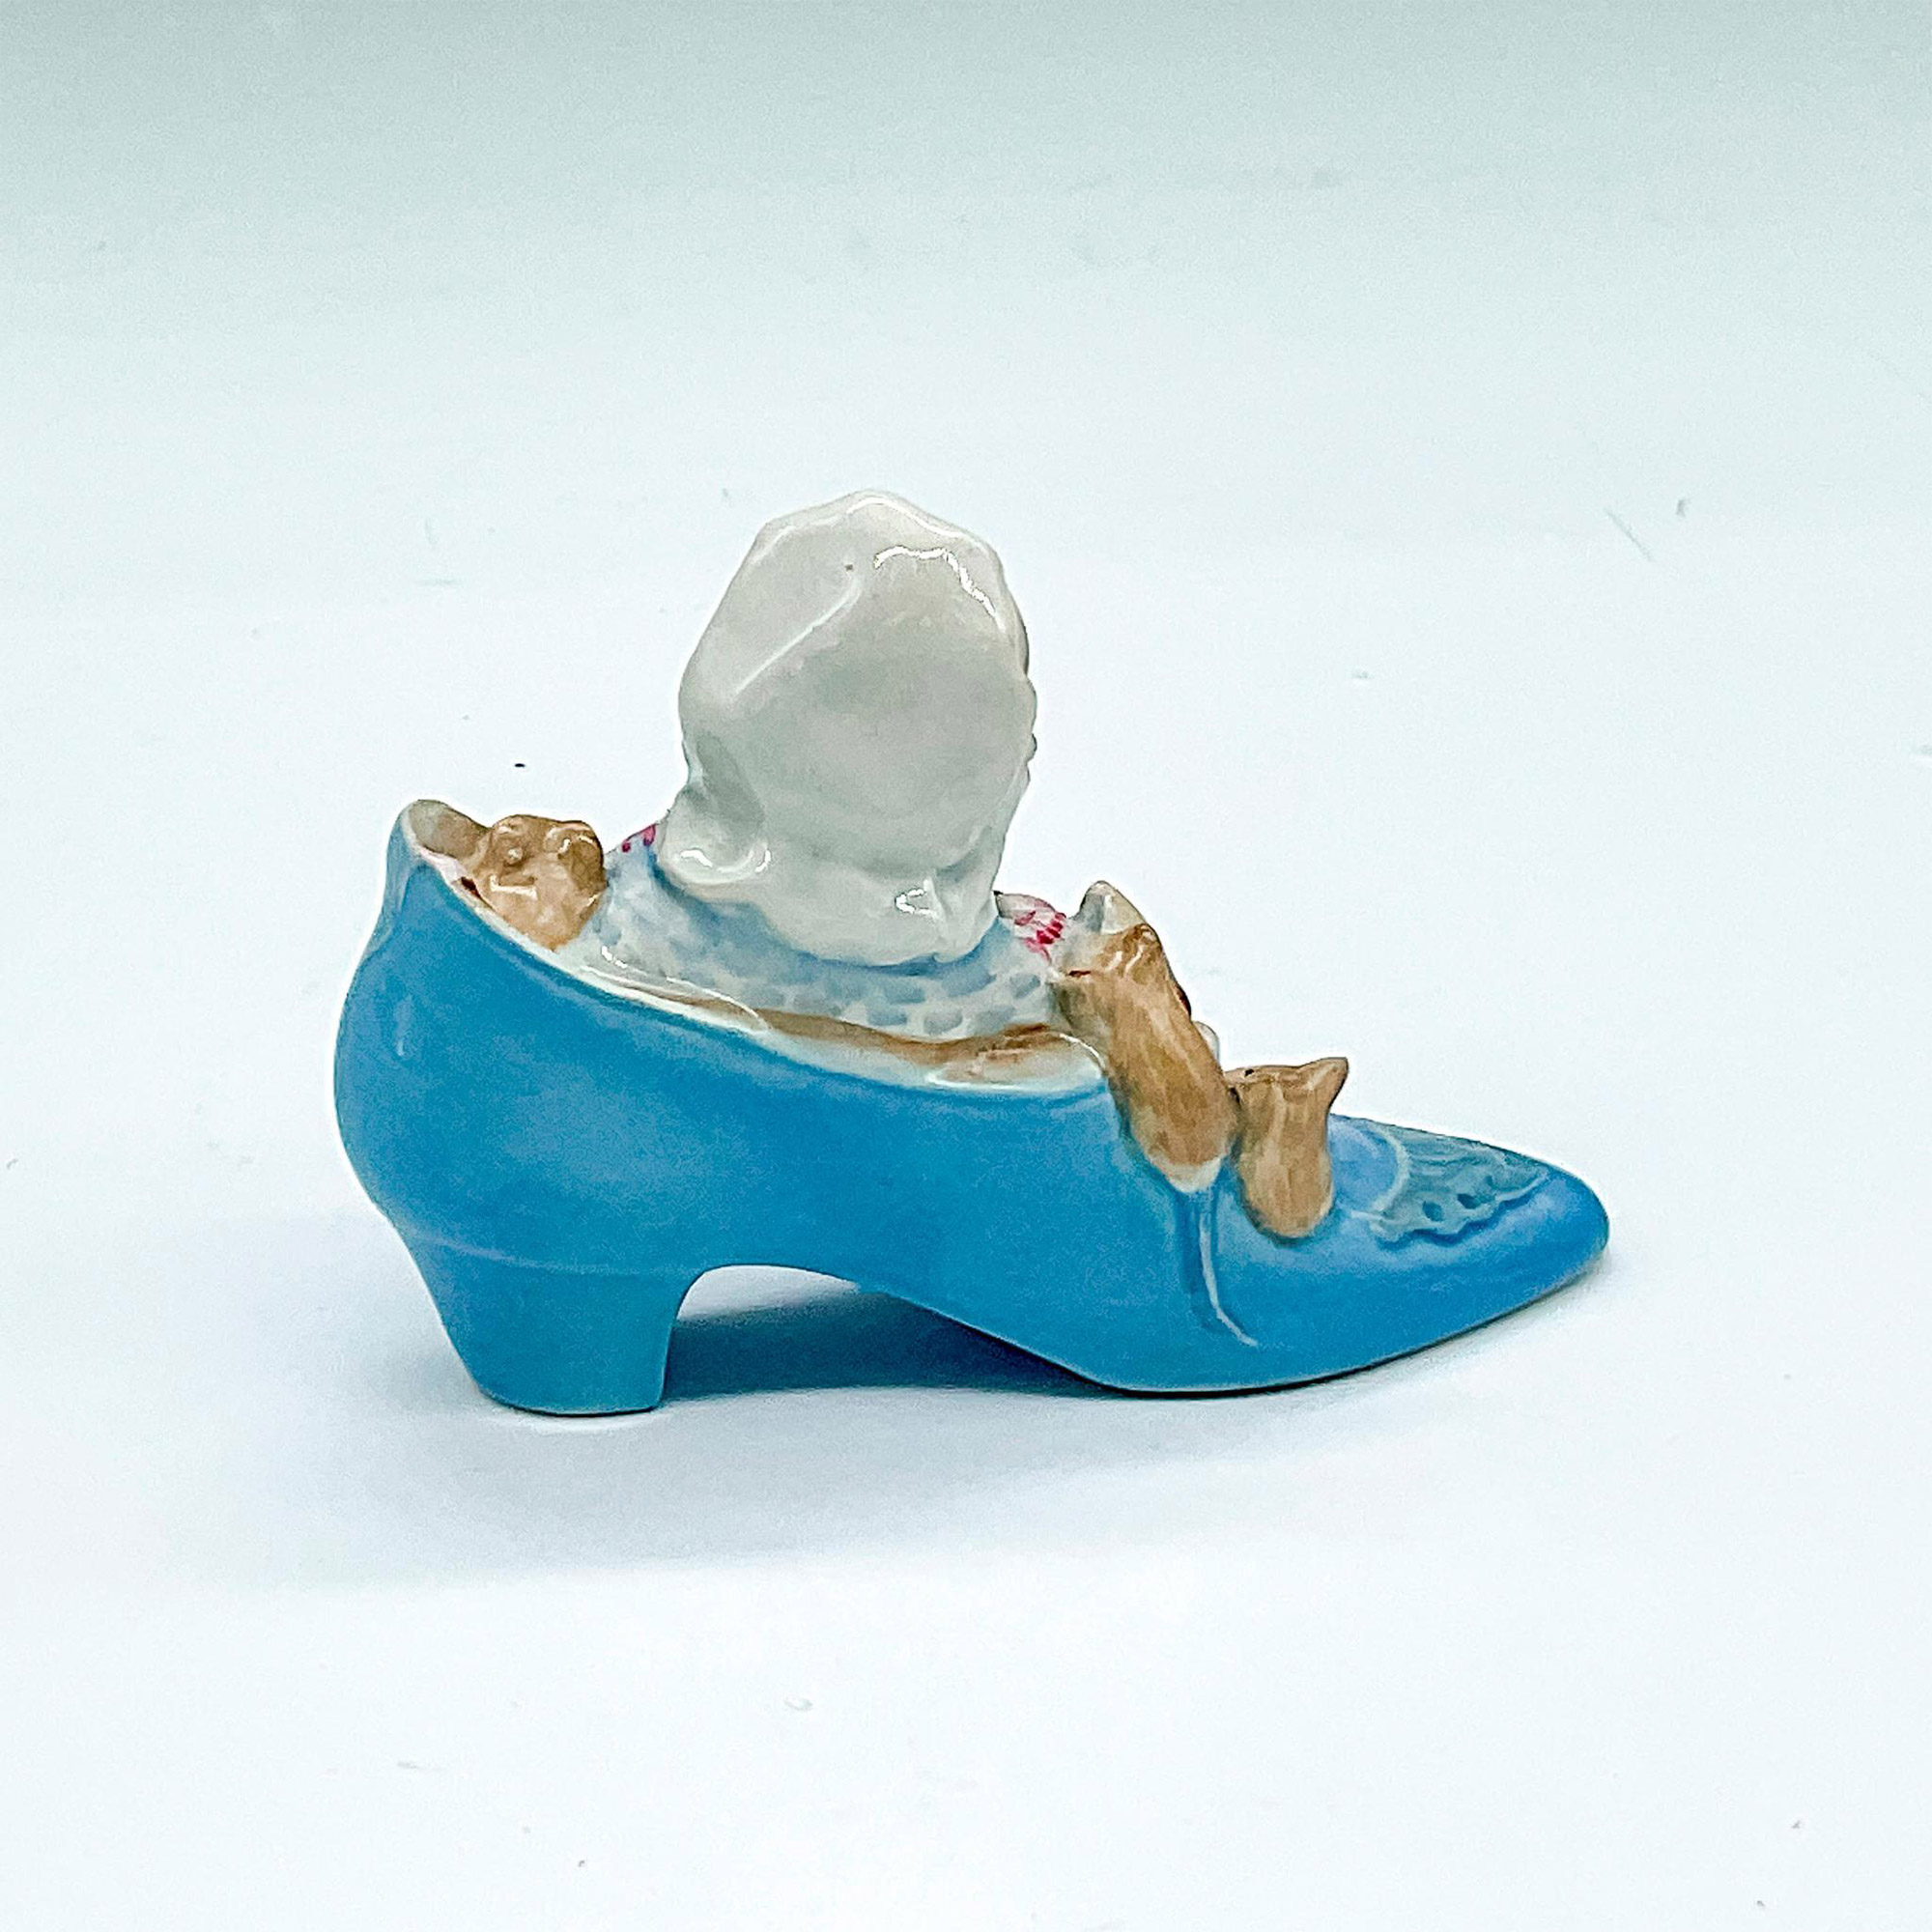 Beswick Beatrix Potter's Figurine, Mouse in Shoe - Image 2 of 3